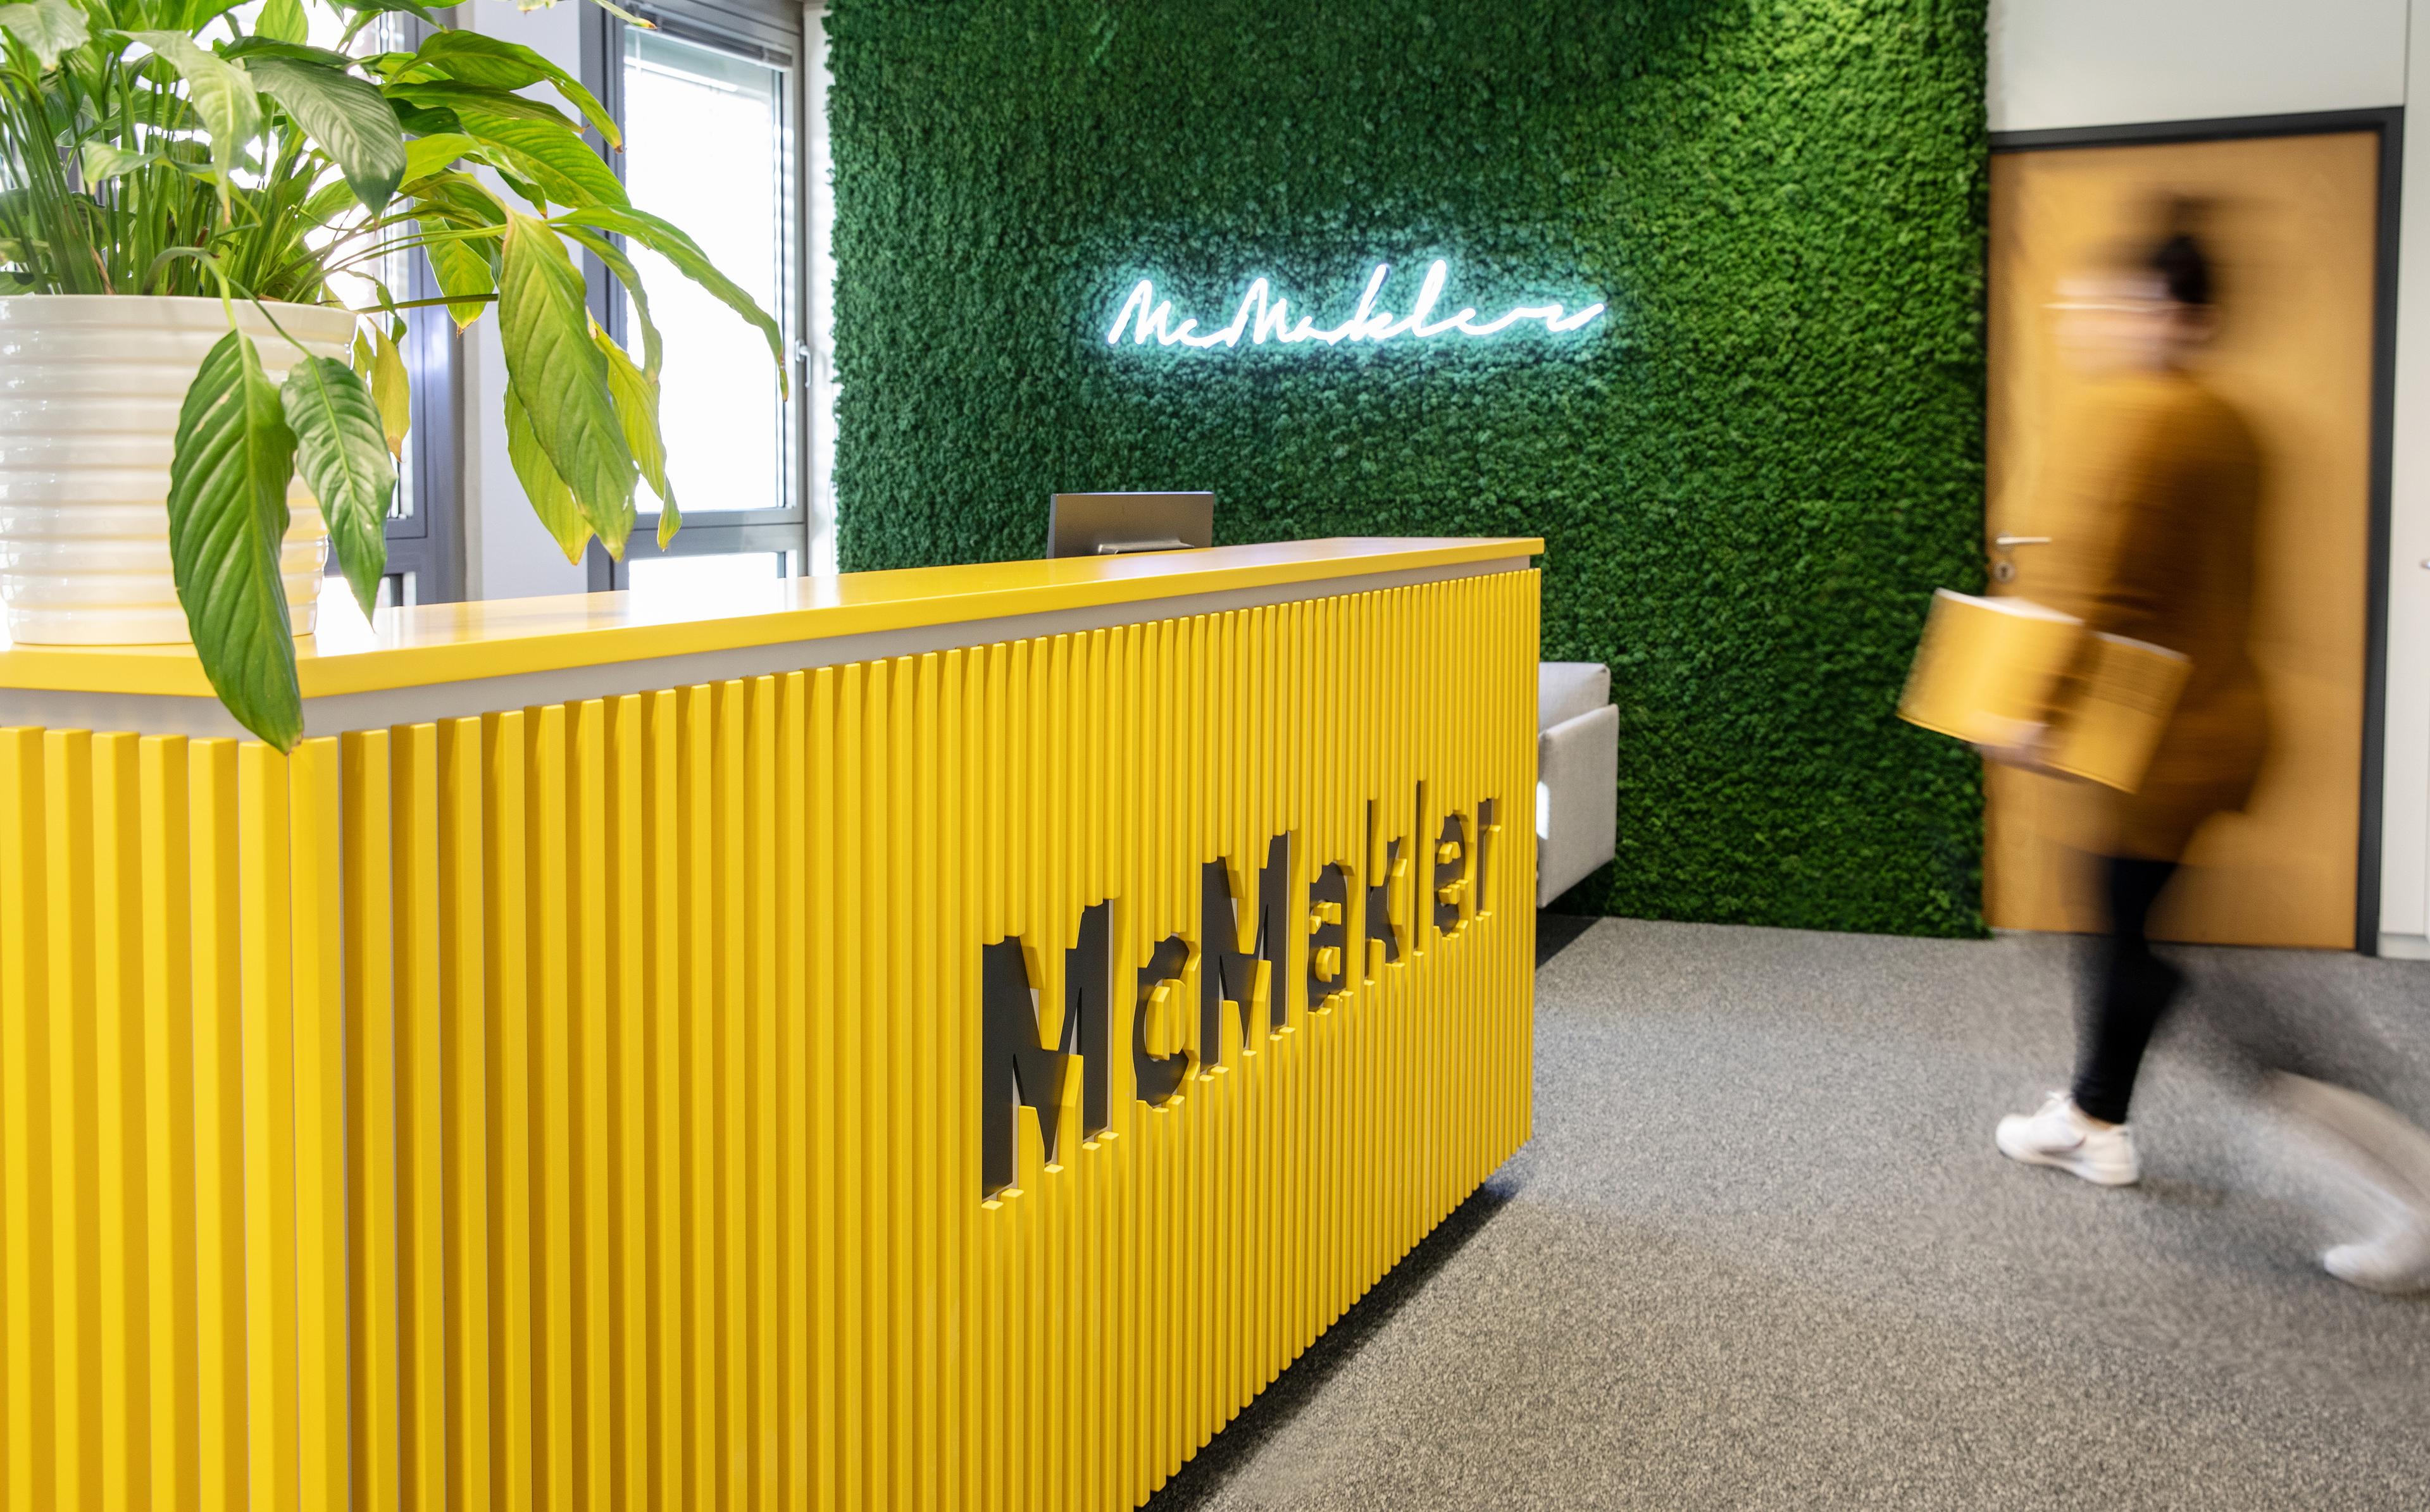 McMakler chooses Circula for the digitization of travel expenses